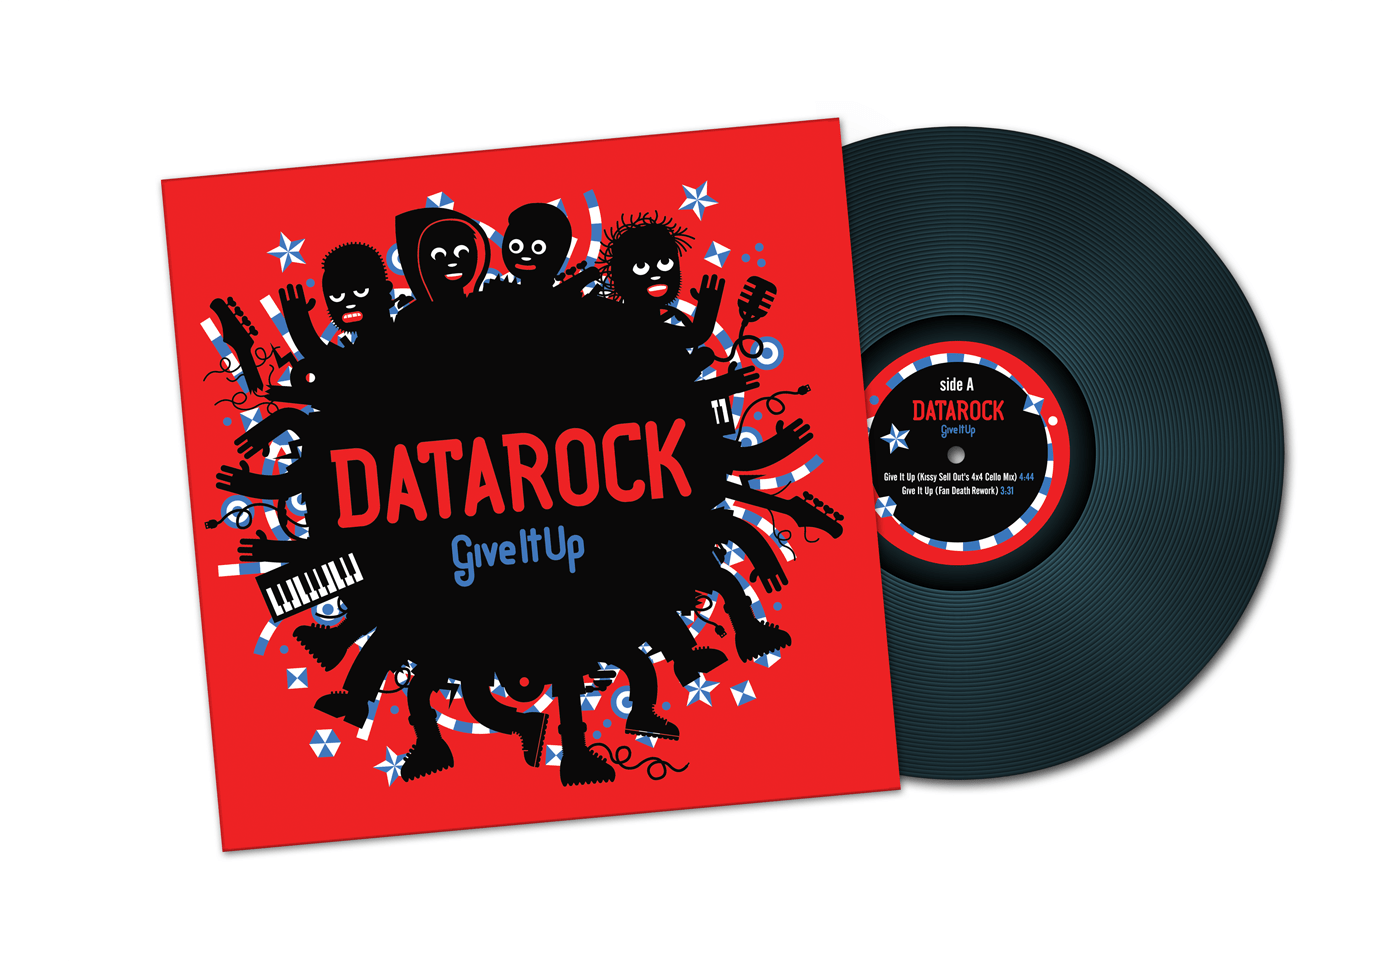 datarock give it up vinyl Album cover album cover record music electronic ILLUSTRATION 